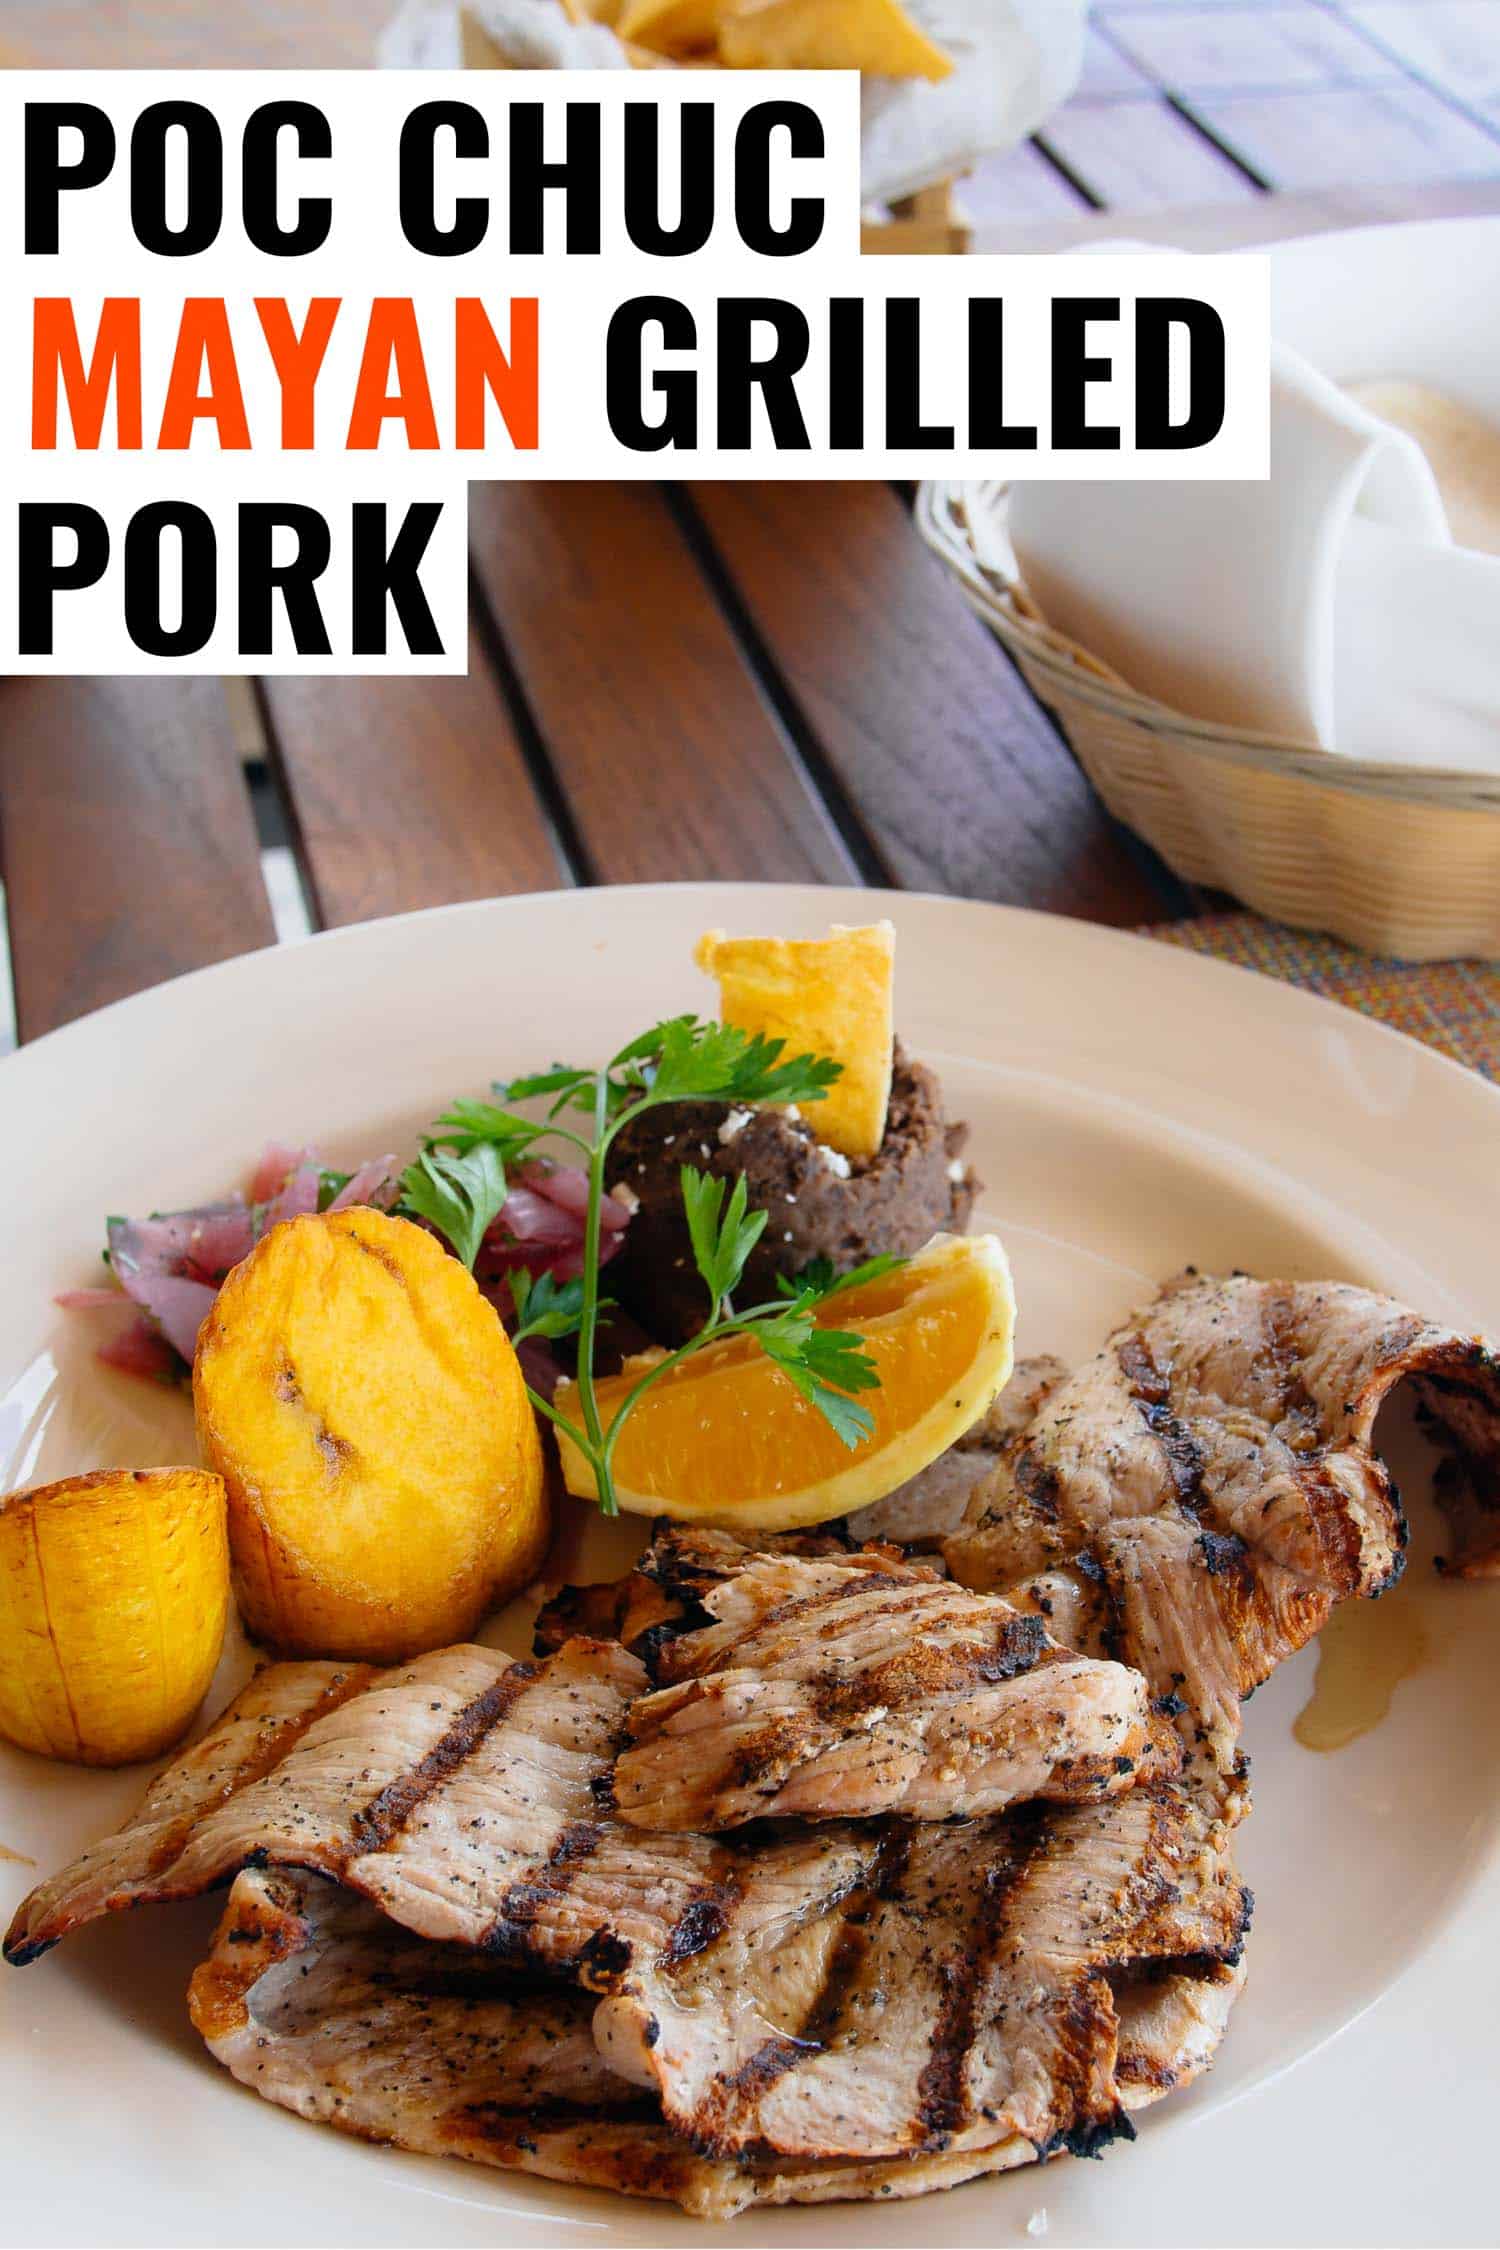 Poc chuc Mayan recipe of grilled pork on a plate with potatoes and greens